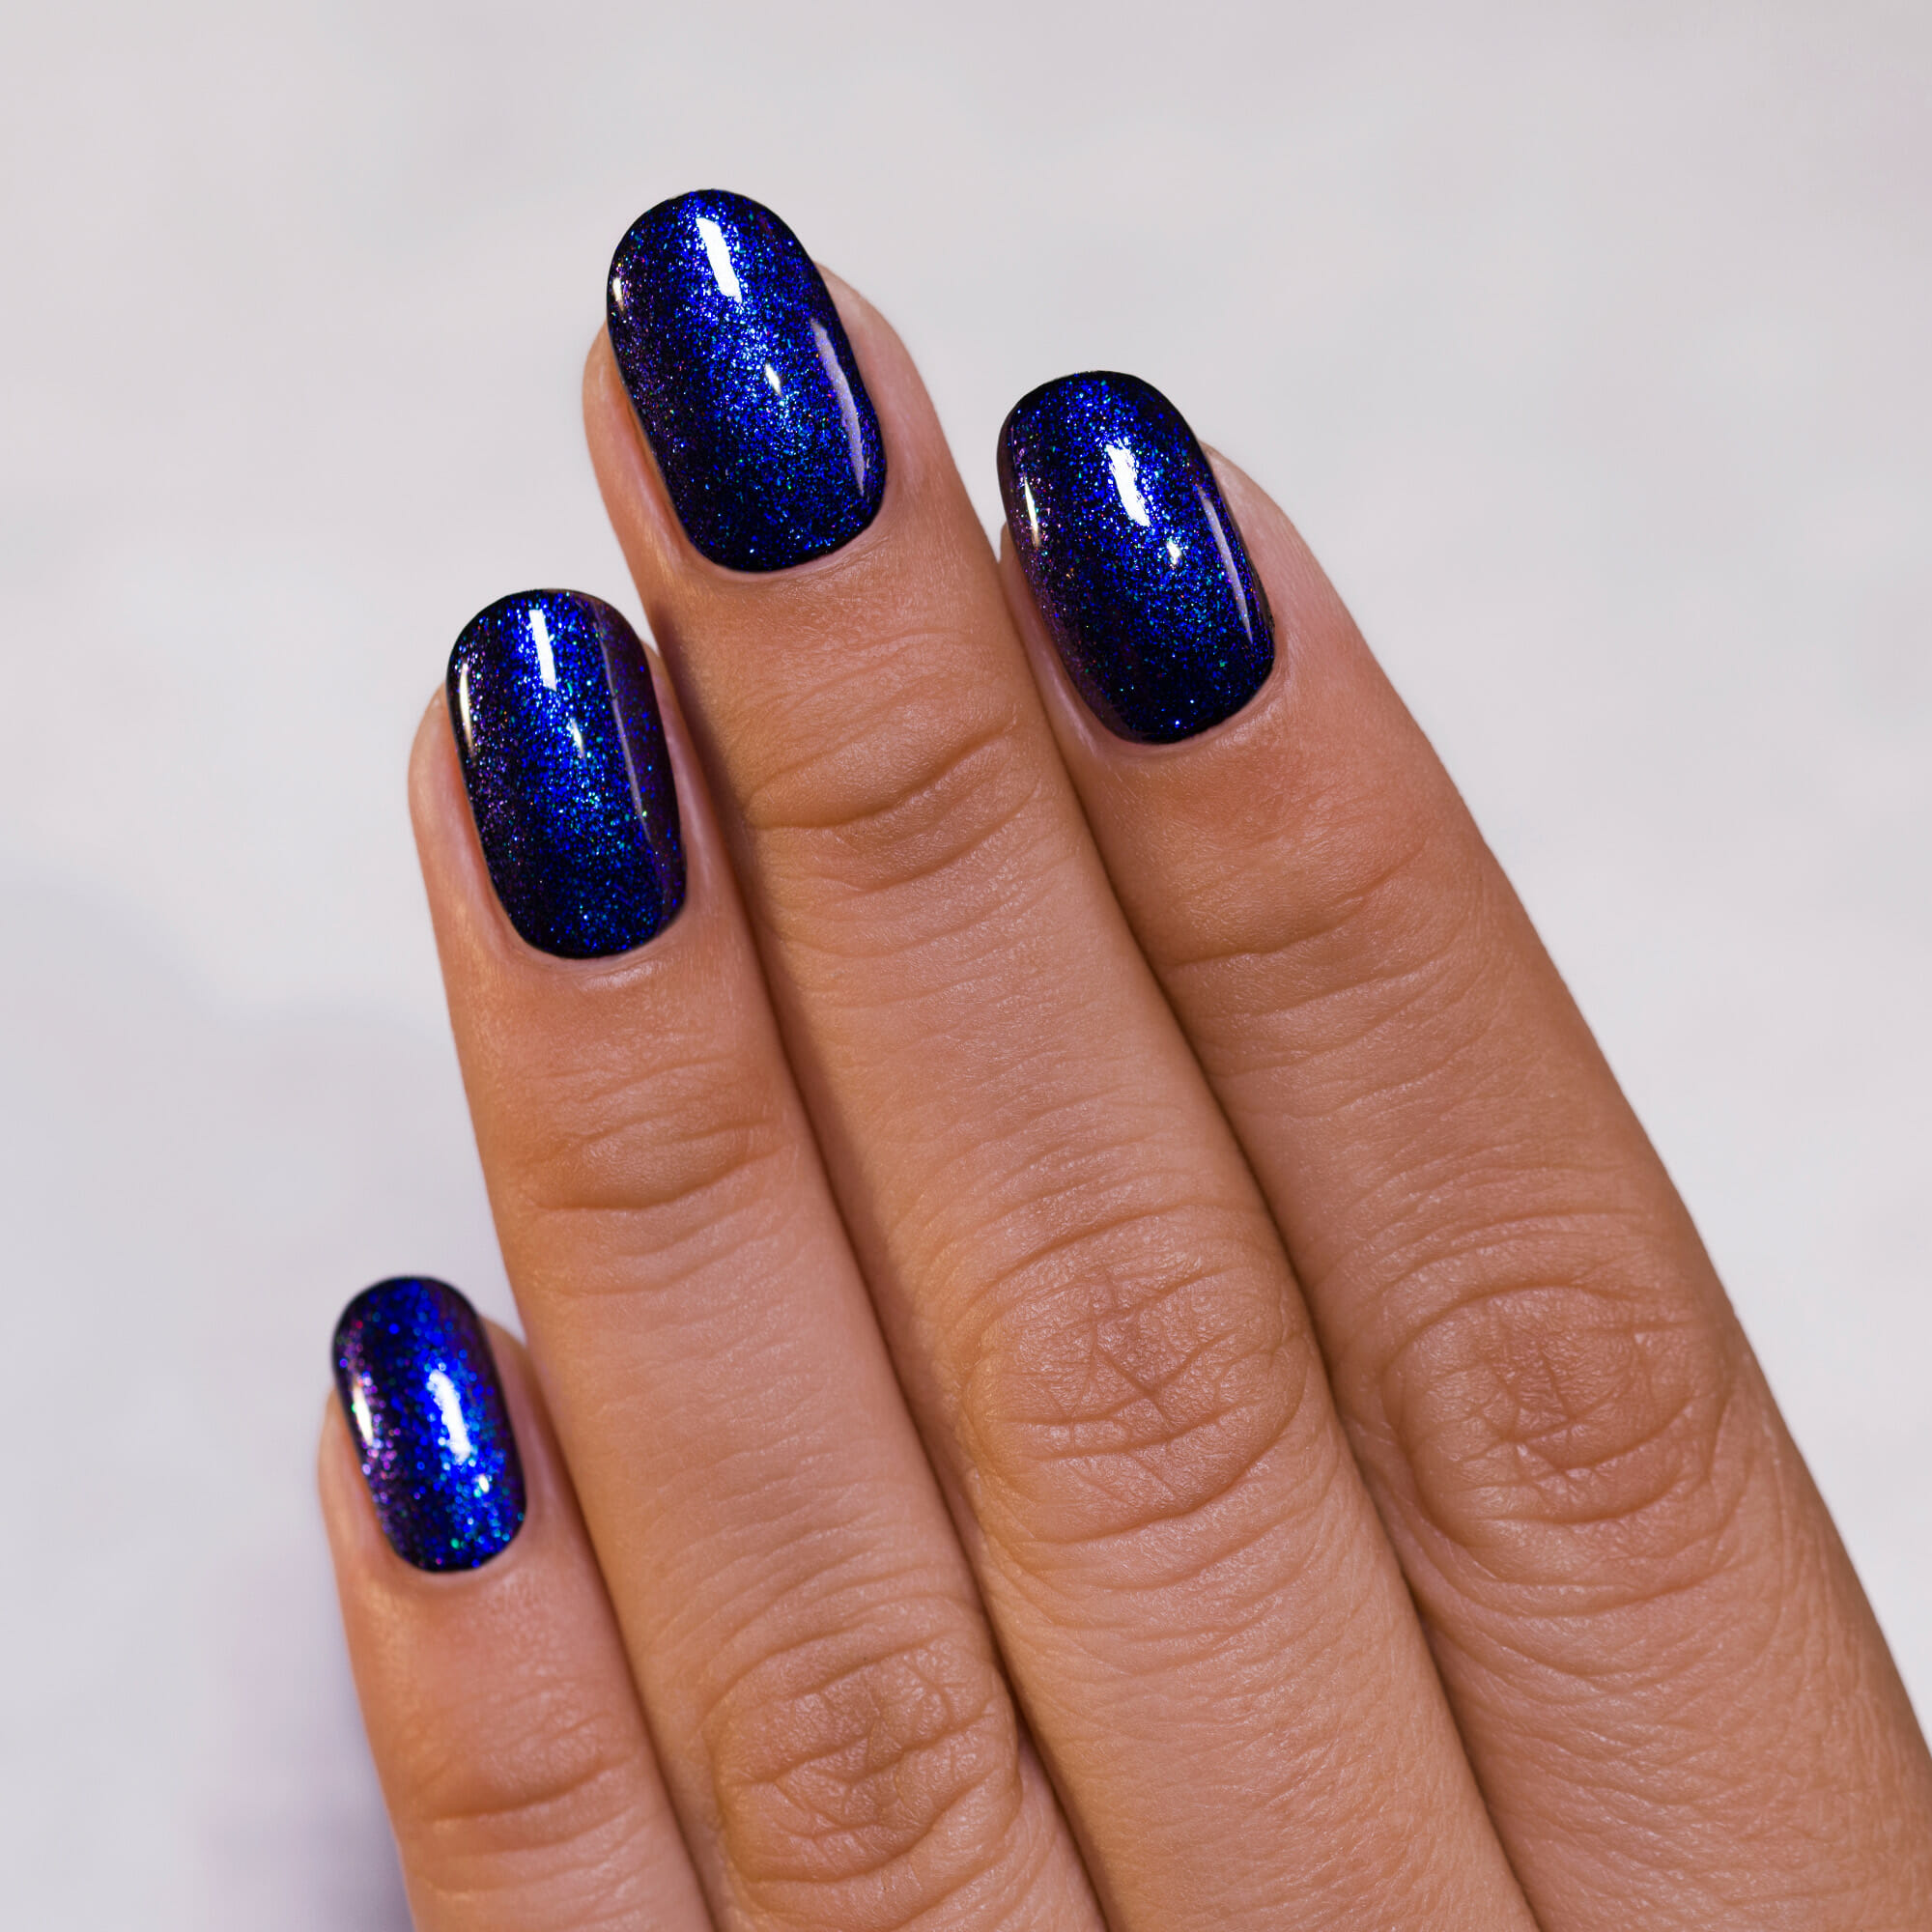 Abyss - Blue to Purple Iridescent Nail Polish Topper by ILNP